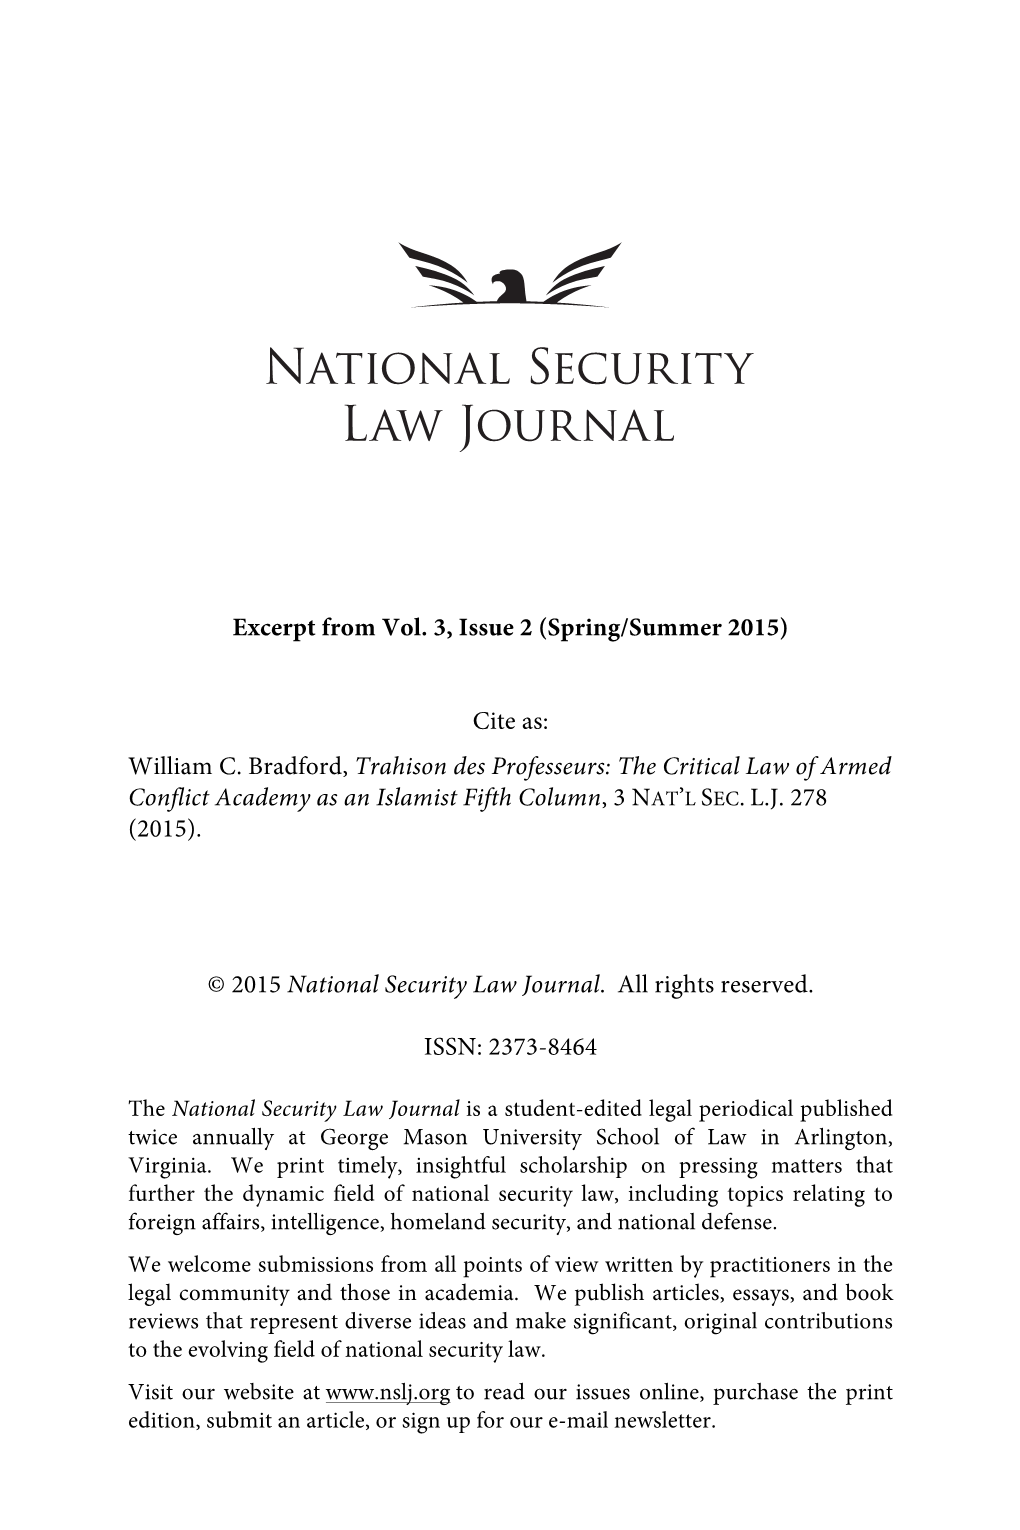 Trahison Des Professeurs: the Critical Law of Armed Conflict Academy As an Islamist Fifth Column, 3 NAT’L SEC